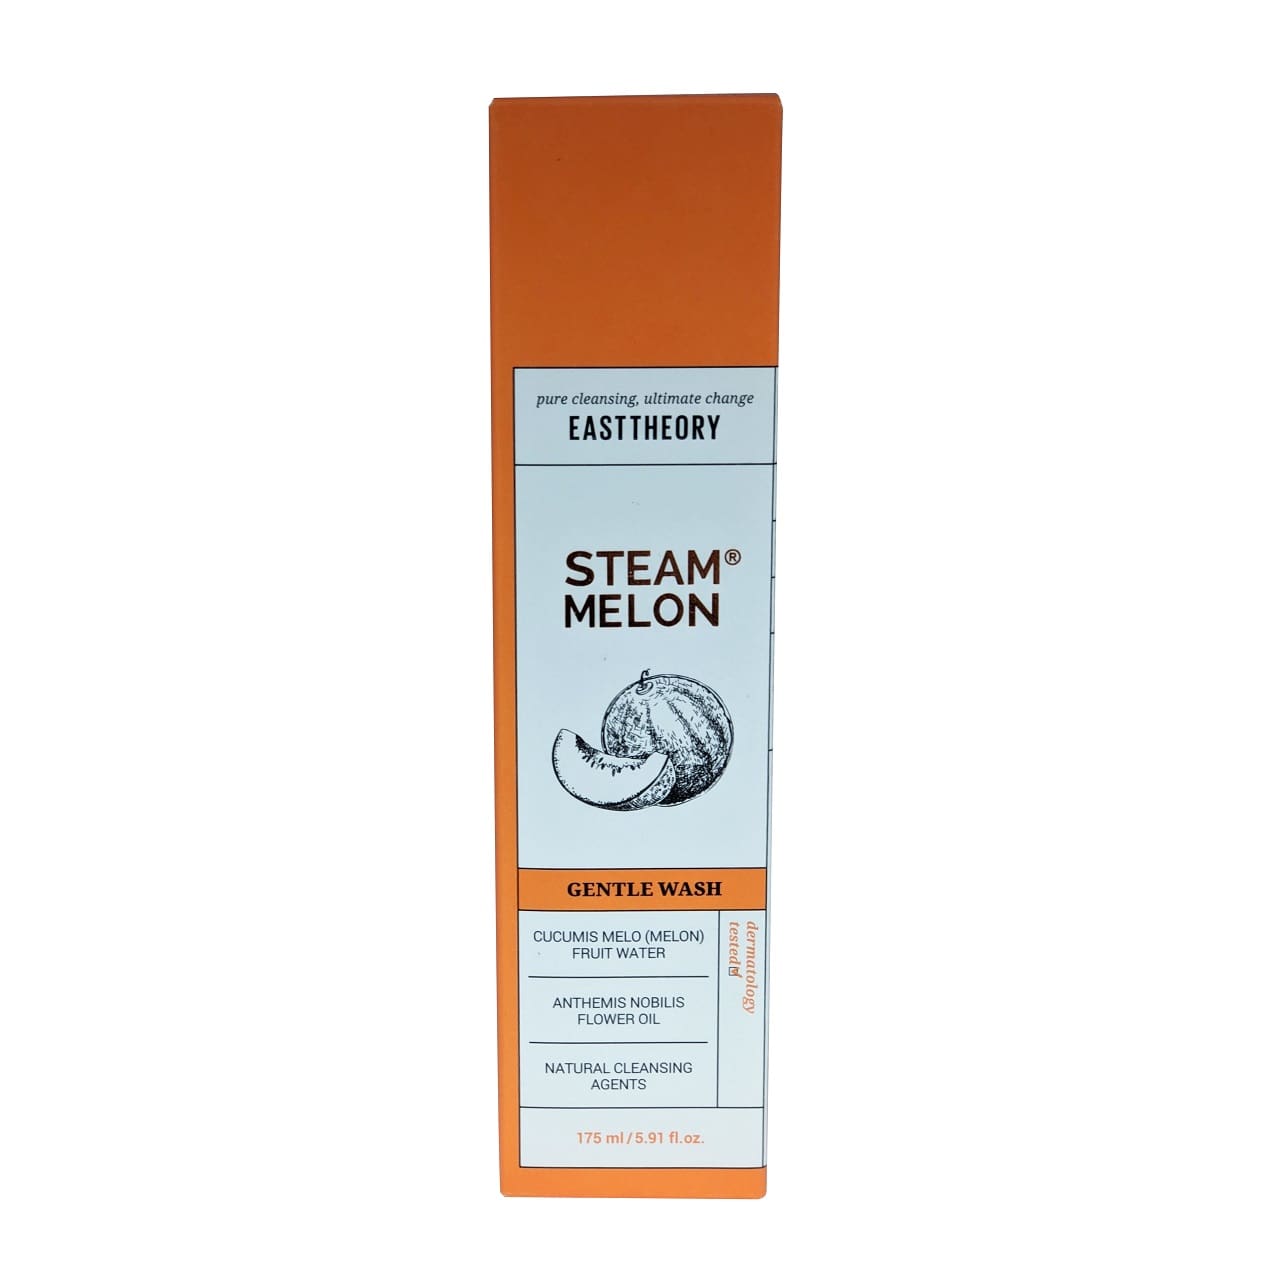 Product label for Easttheory Steam Melon Gentle Wash